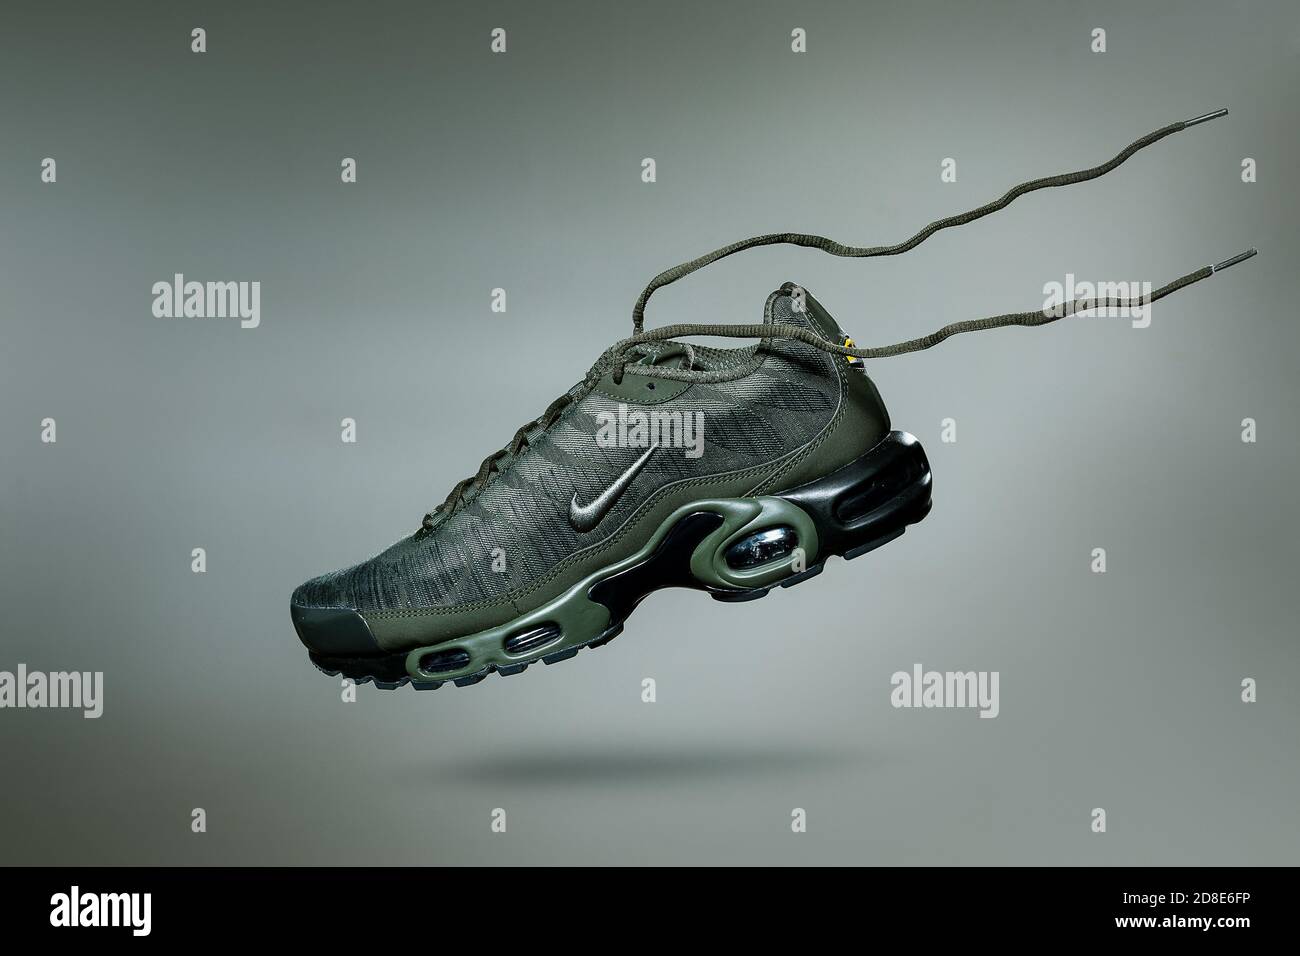 Nike Plus High Resolution Stock Photography and Images - Alamy